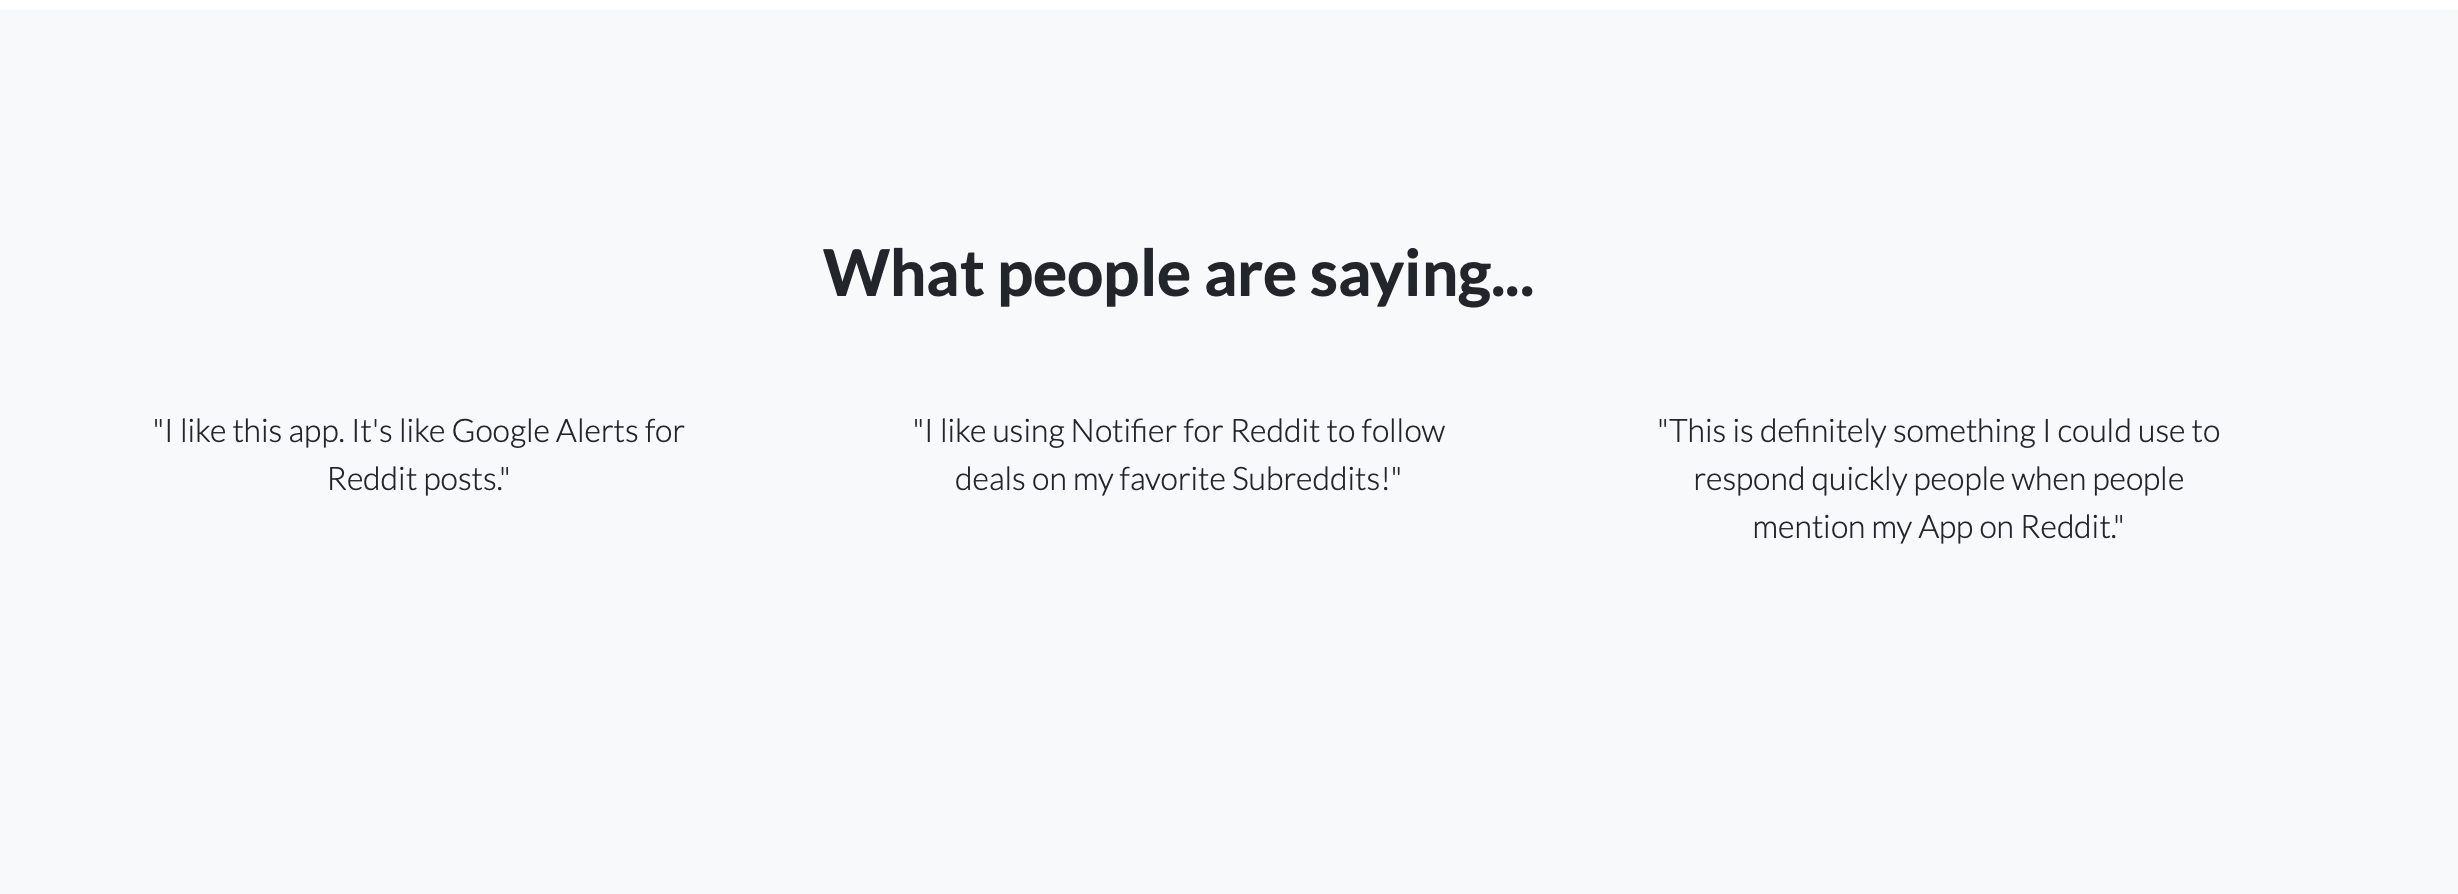 Find pricing, reviews and other details about Notifier for Reddit